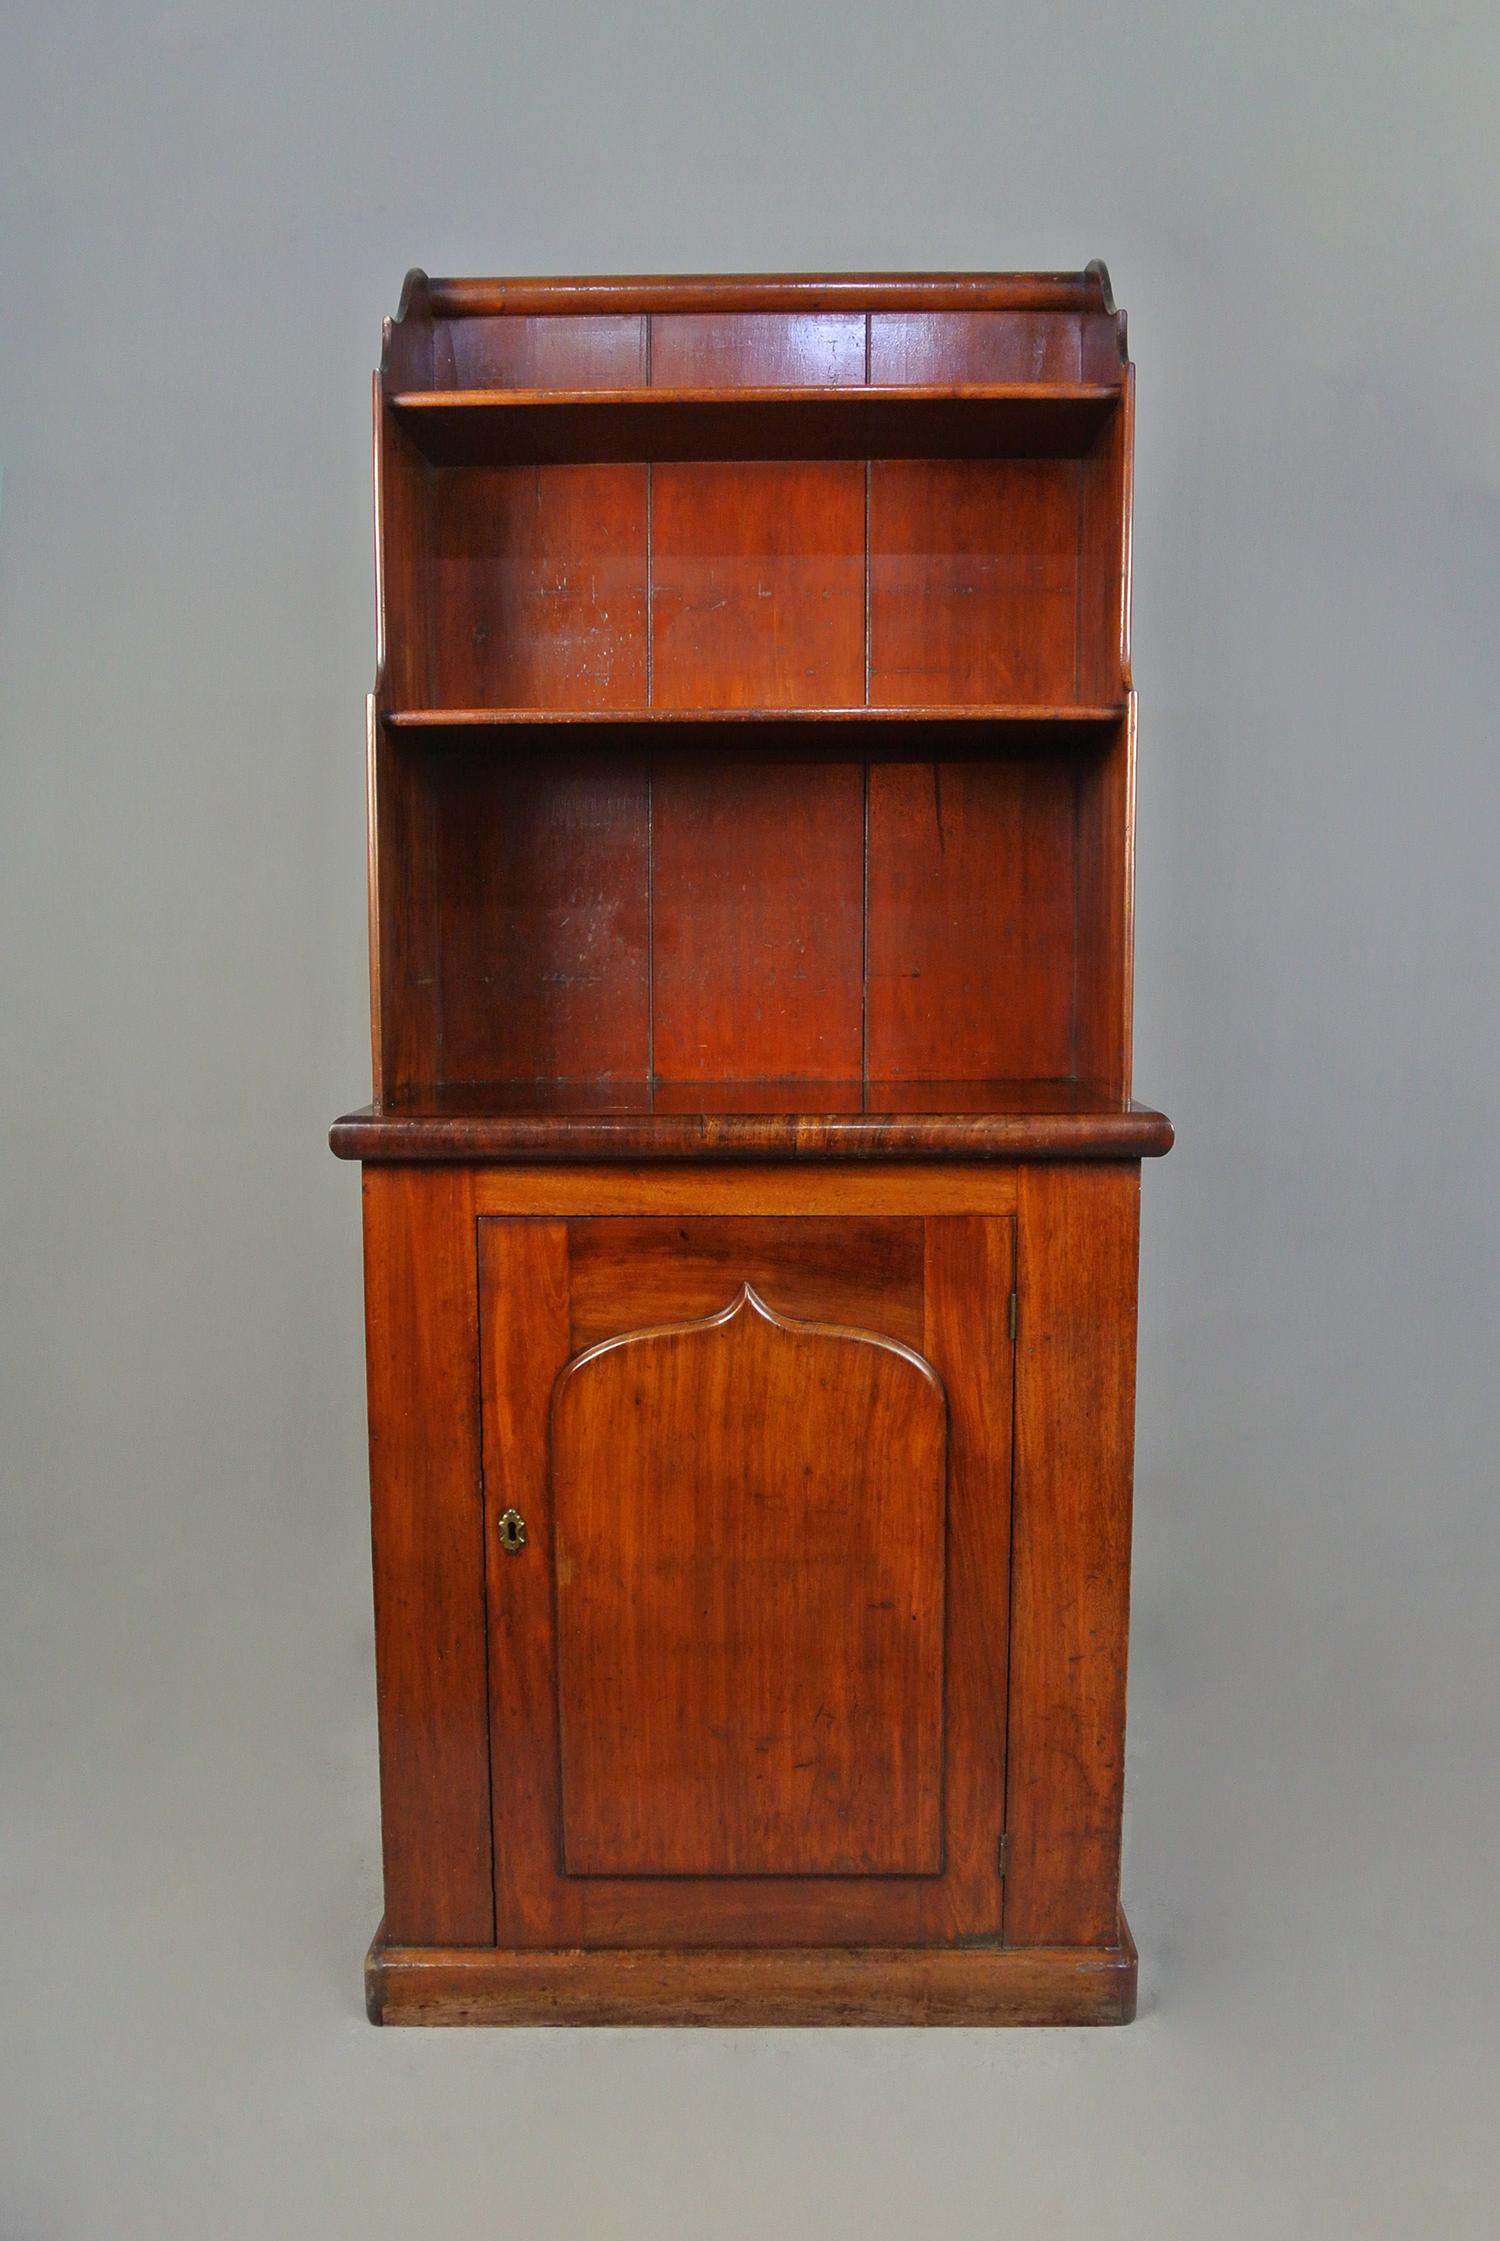 Very attractive Georgian small bookcase with a cupboard below.  

The mahogany with a good colour throughout and graduated waterfall shelved uprights to the upper section. 

The cupboard door with arched moulding to the front panel and with an